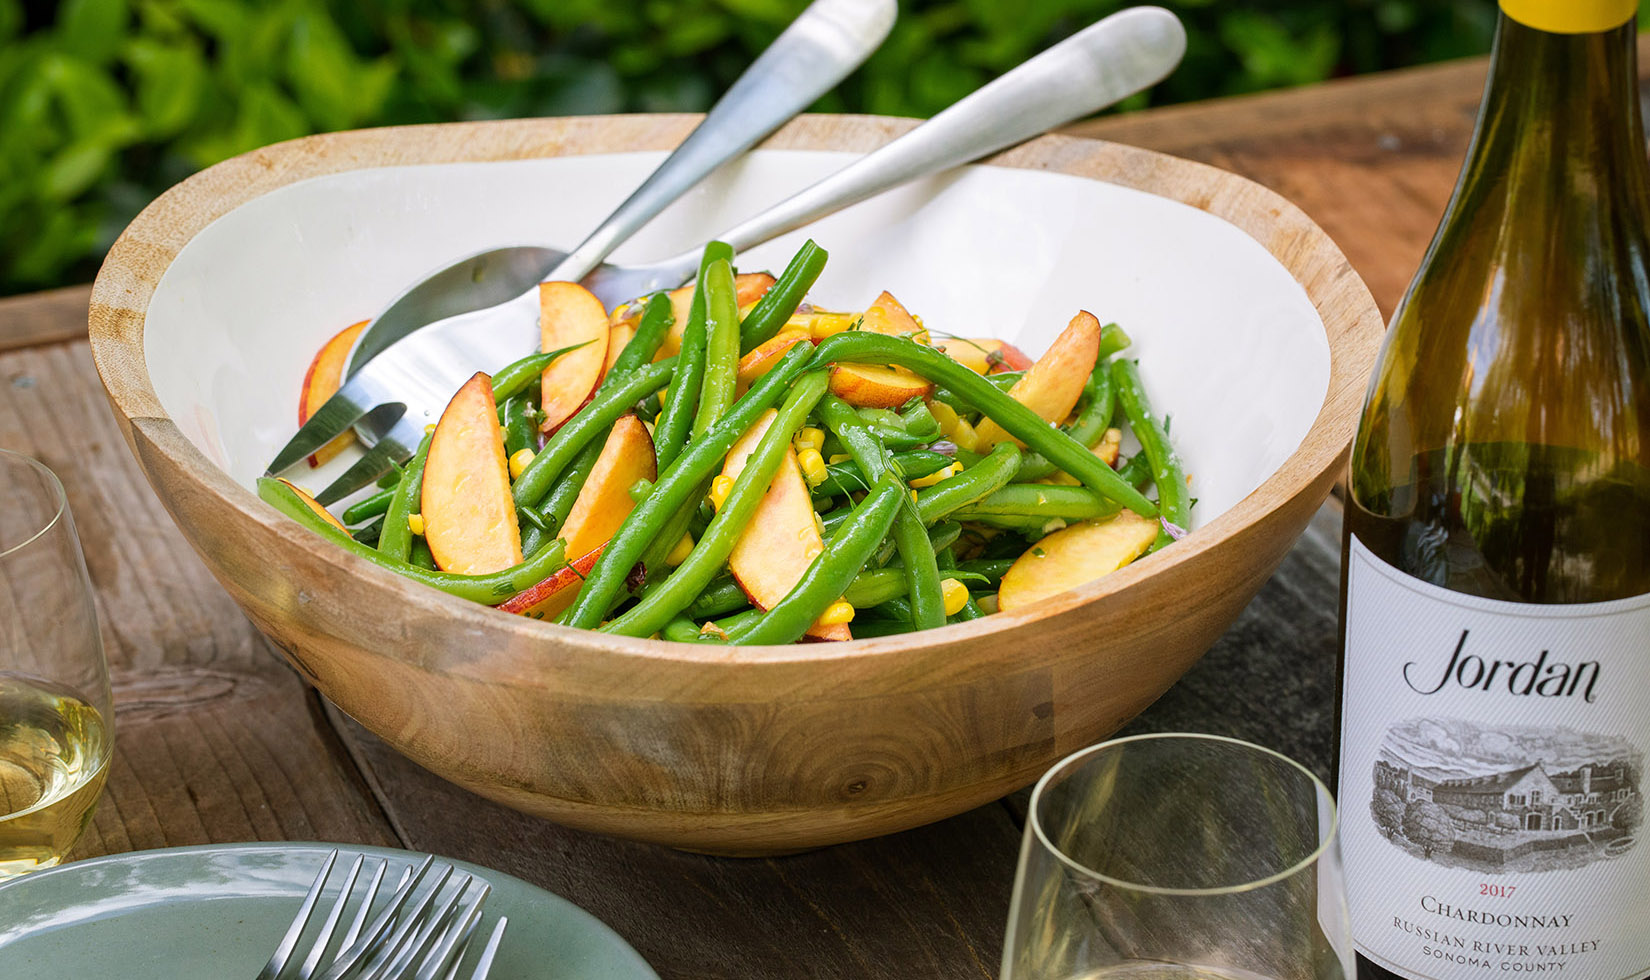 French green bean salad with peaches in bowl next to a bottle of Jordan Chardonnay